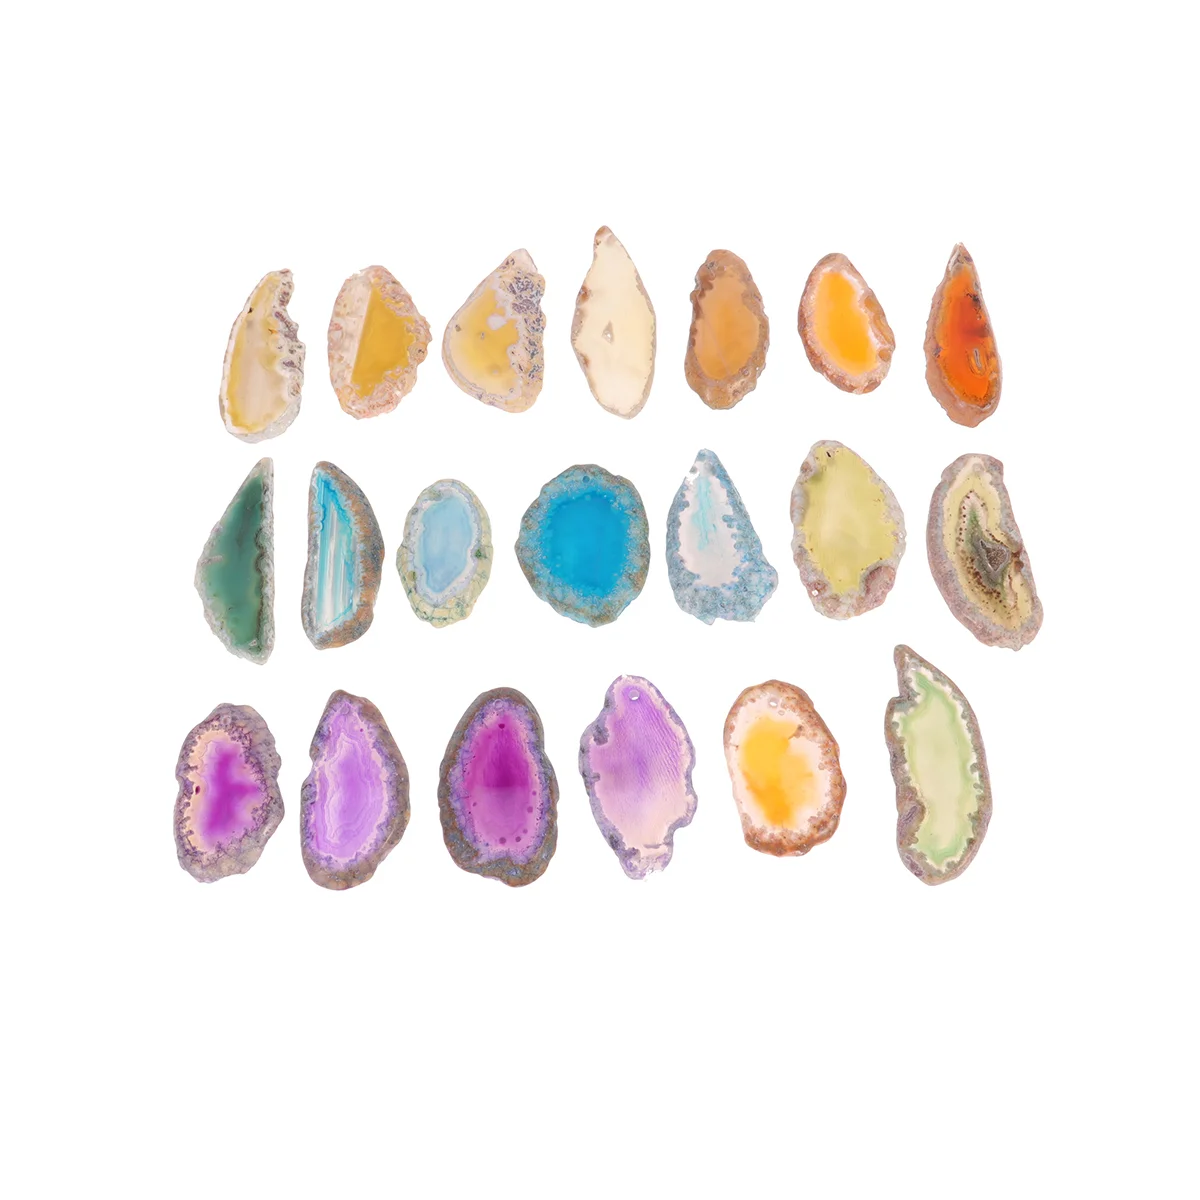 

20PCS Pieces Drilled Natural Agate Gemstone Slices, Colored Geode Polished Slabs, Agate Place Cards, Craft Project Loose Agate